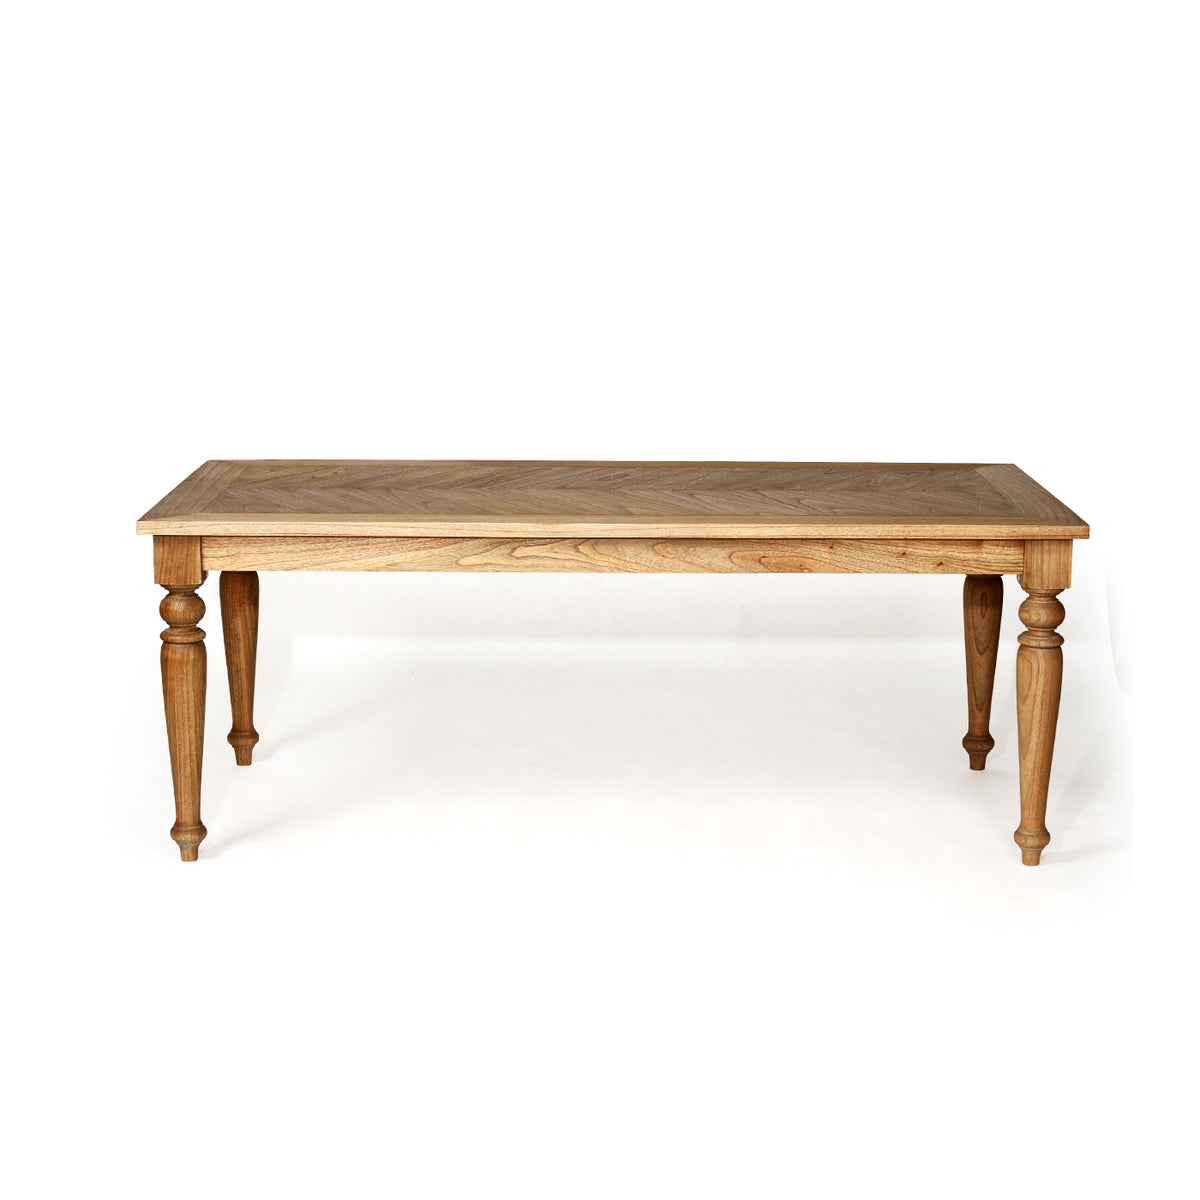 Balencia Old Wood Dining Table – 2.4m - Notbrand